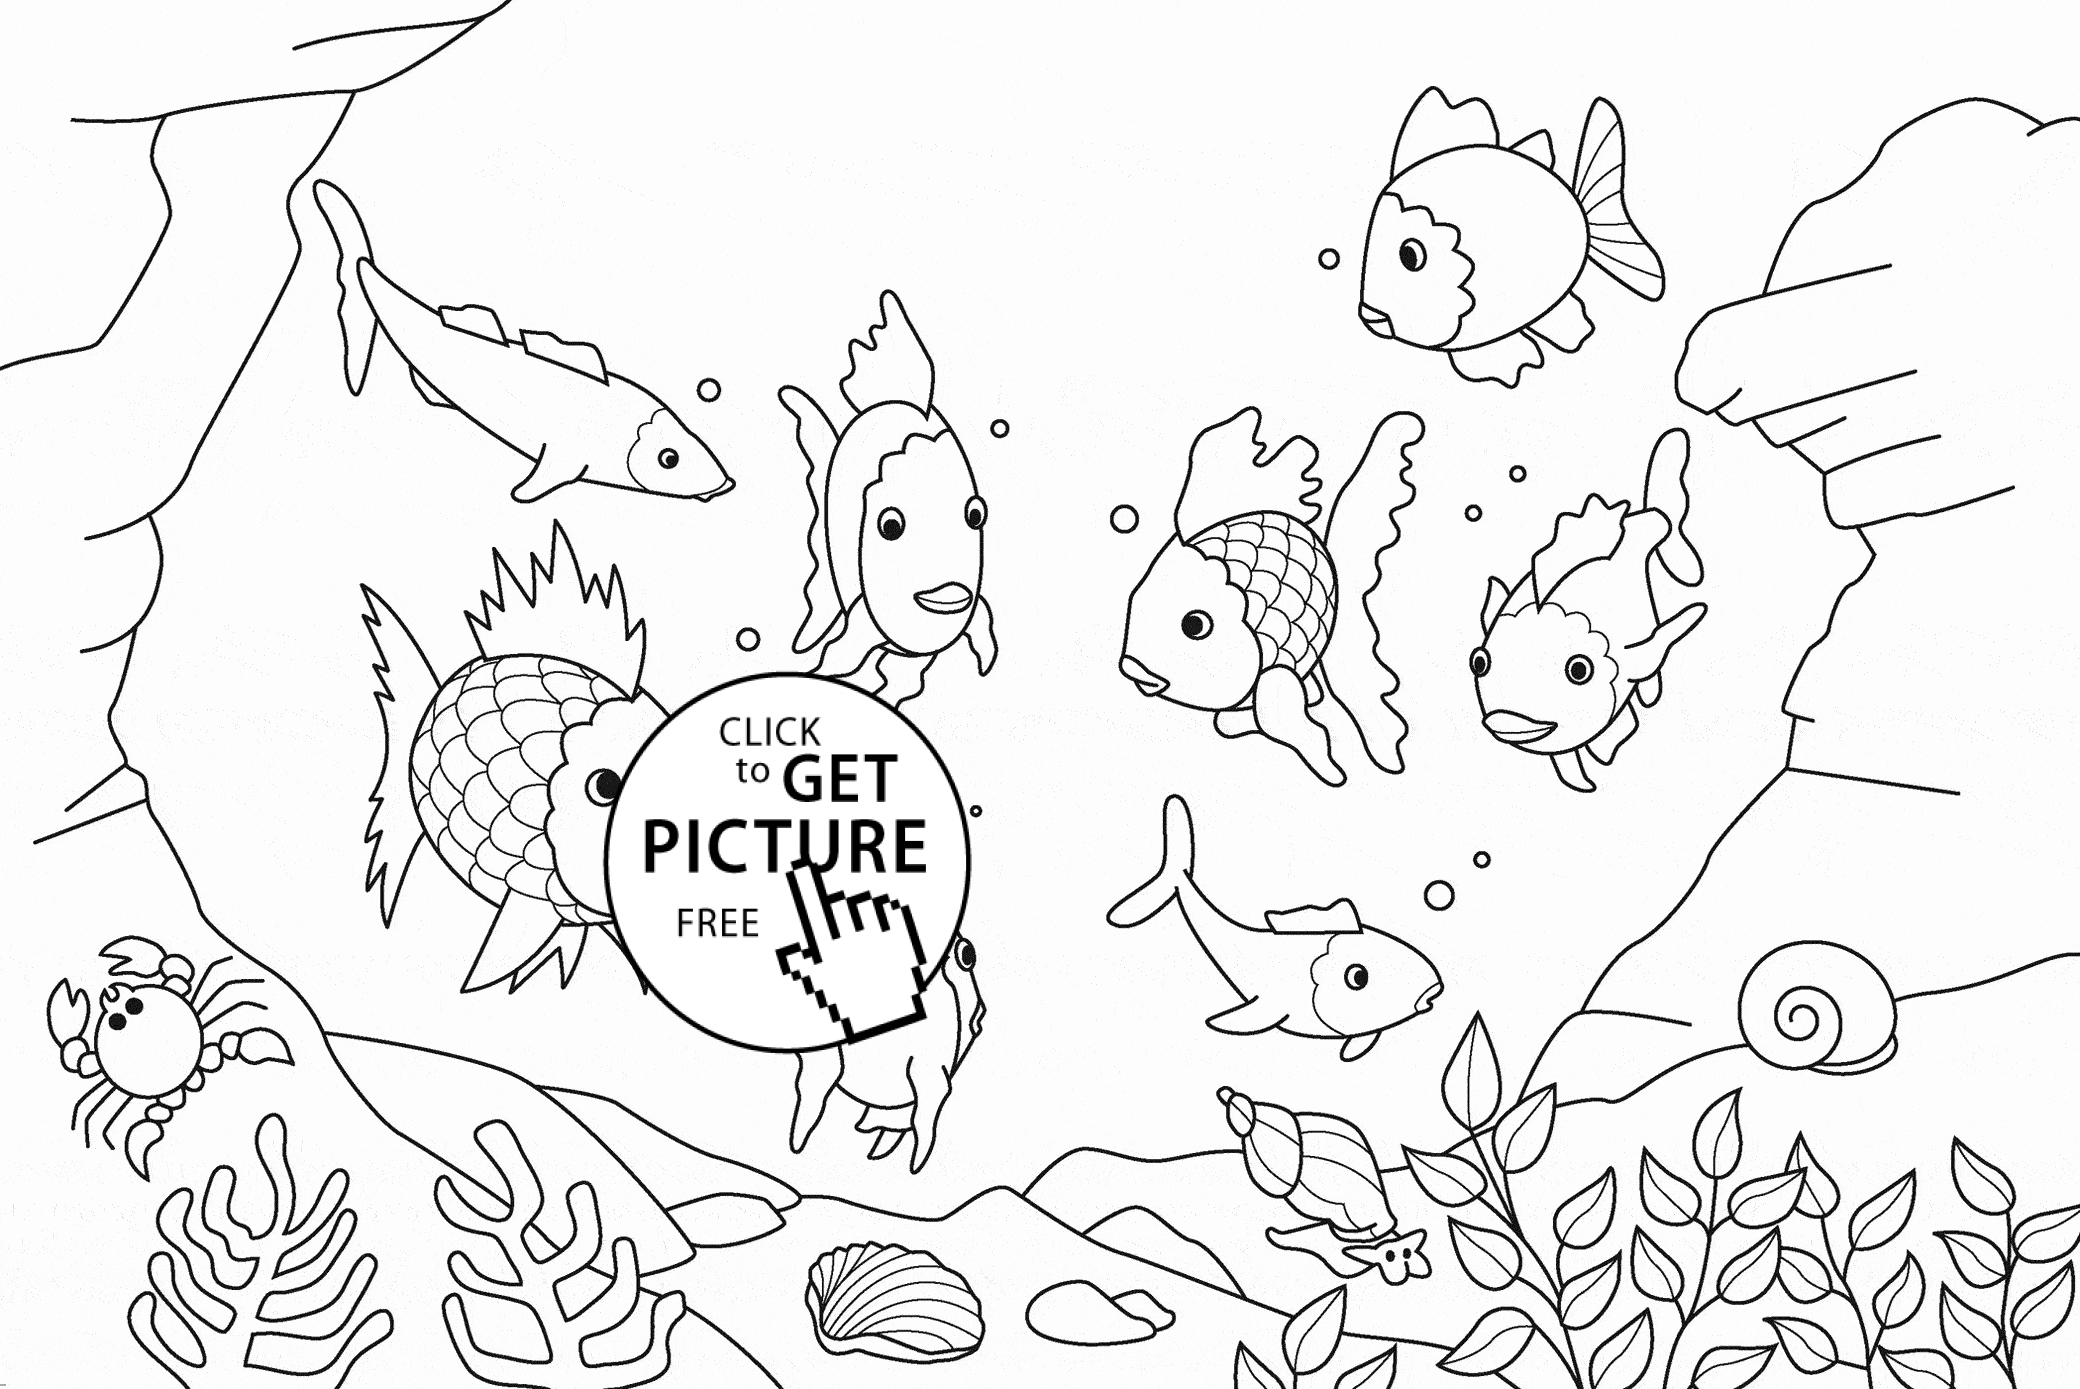 Rainbow Fish coloring page for kids, animal coloring pages ...